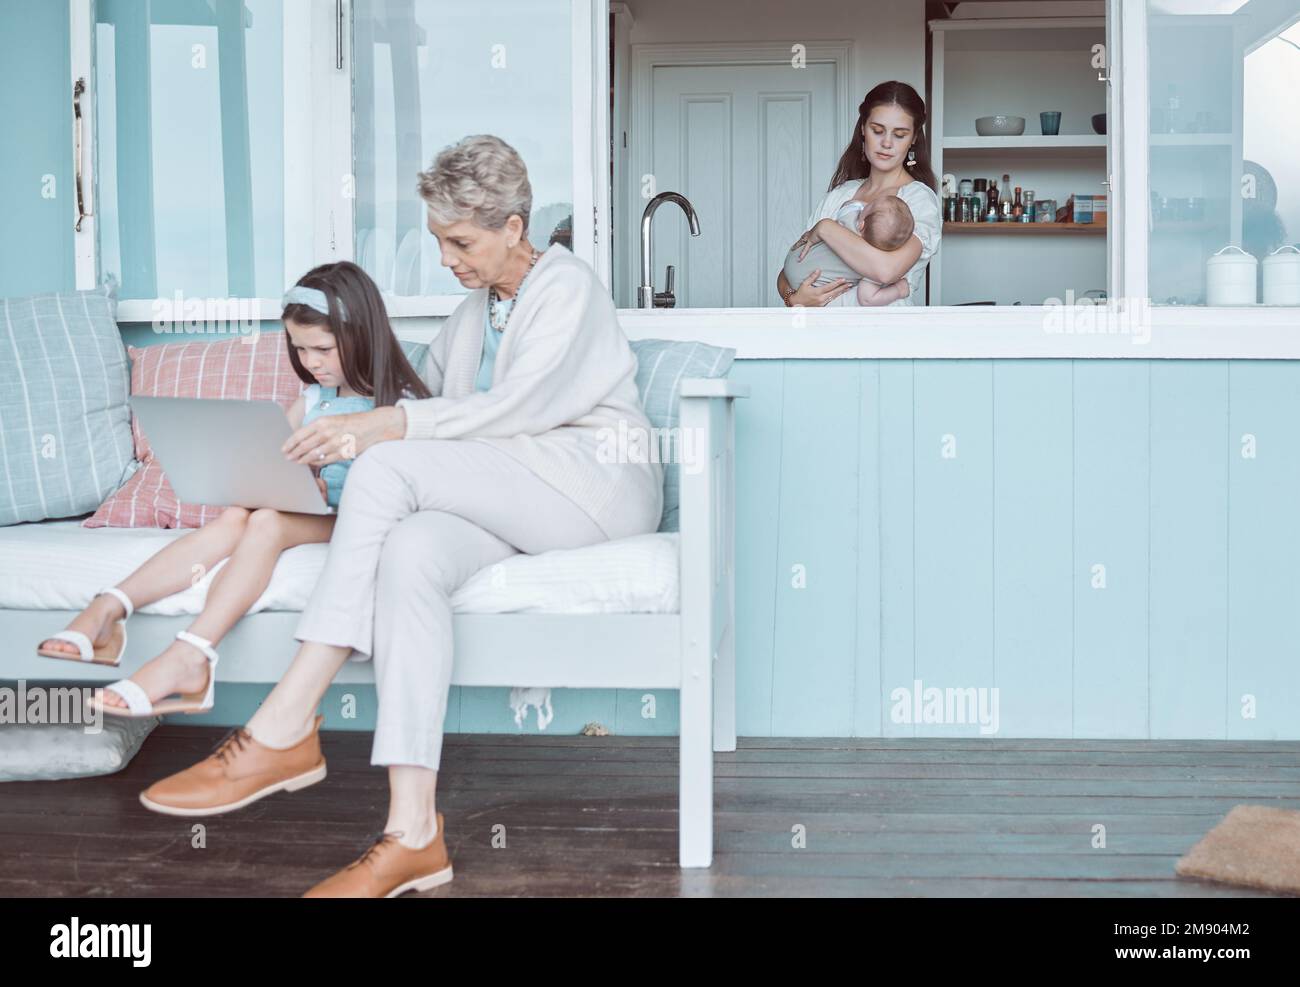 Well watch while we wait for mom. a mature woman bonding with her granddaughter while a mother holds her newborn in the background. Stock Photo